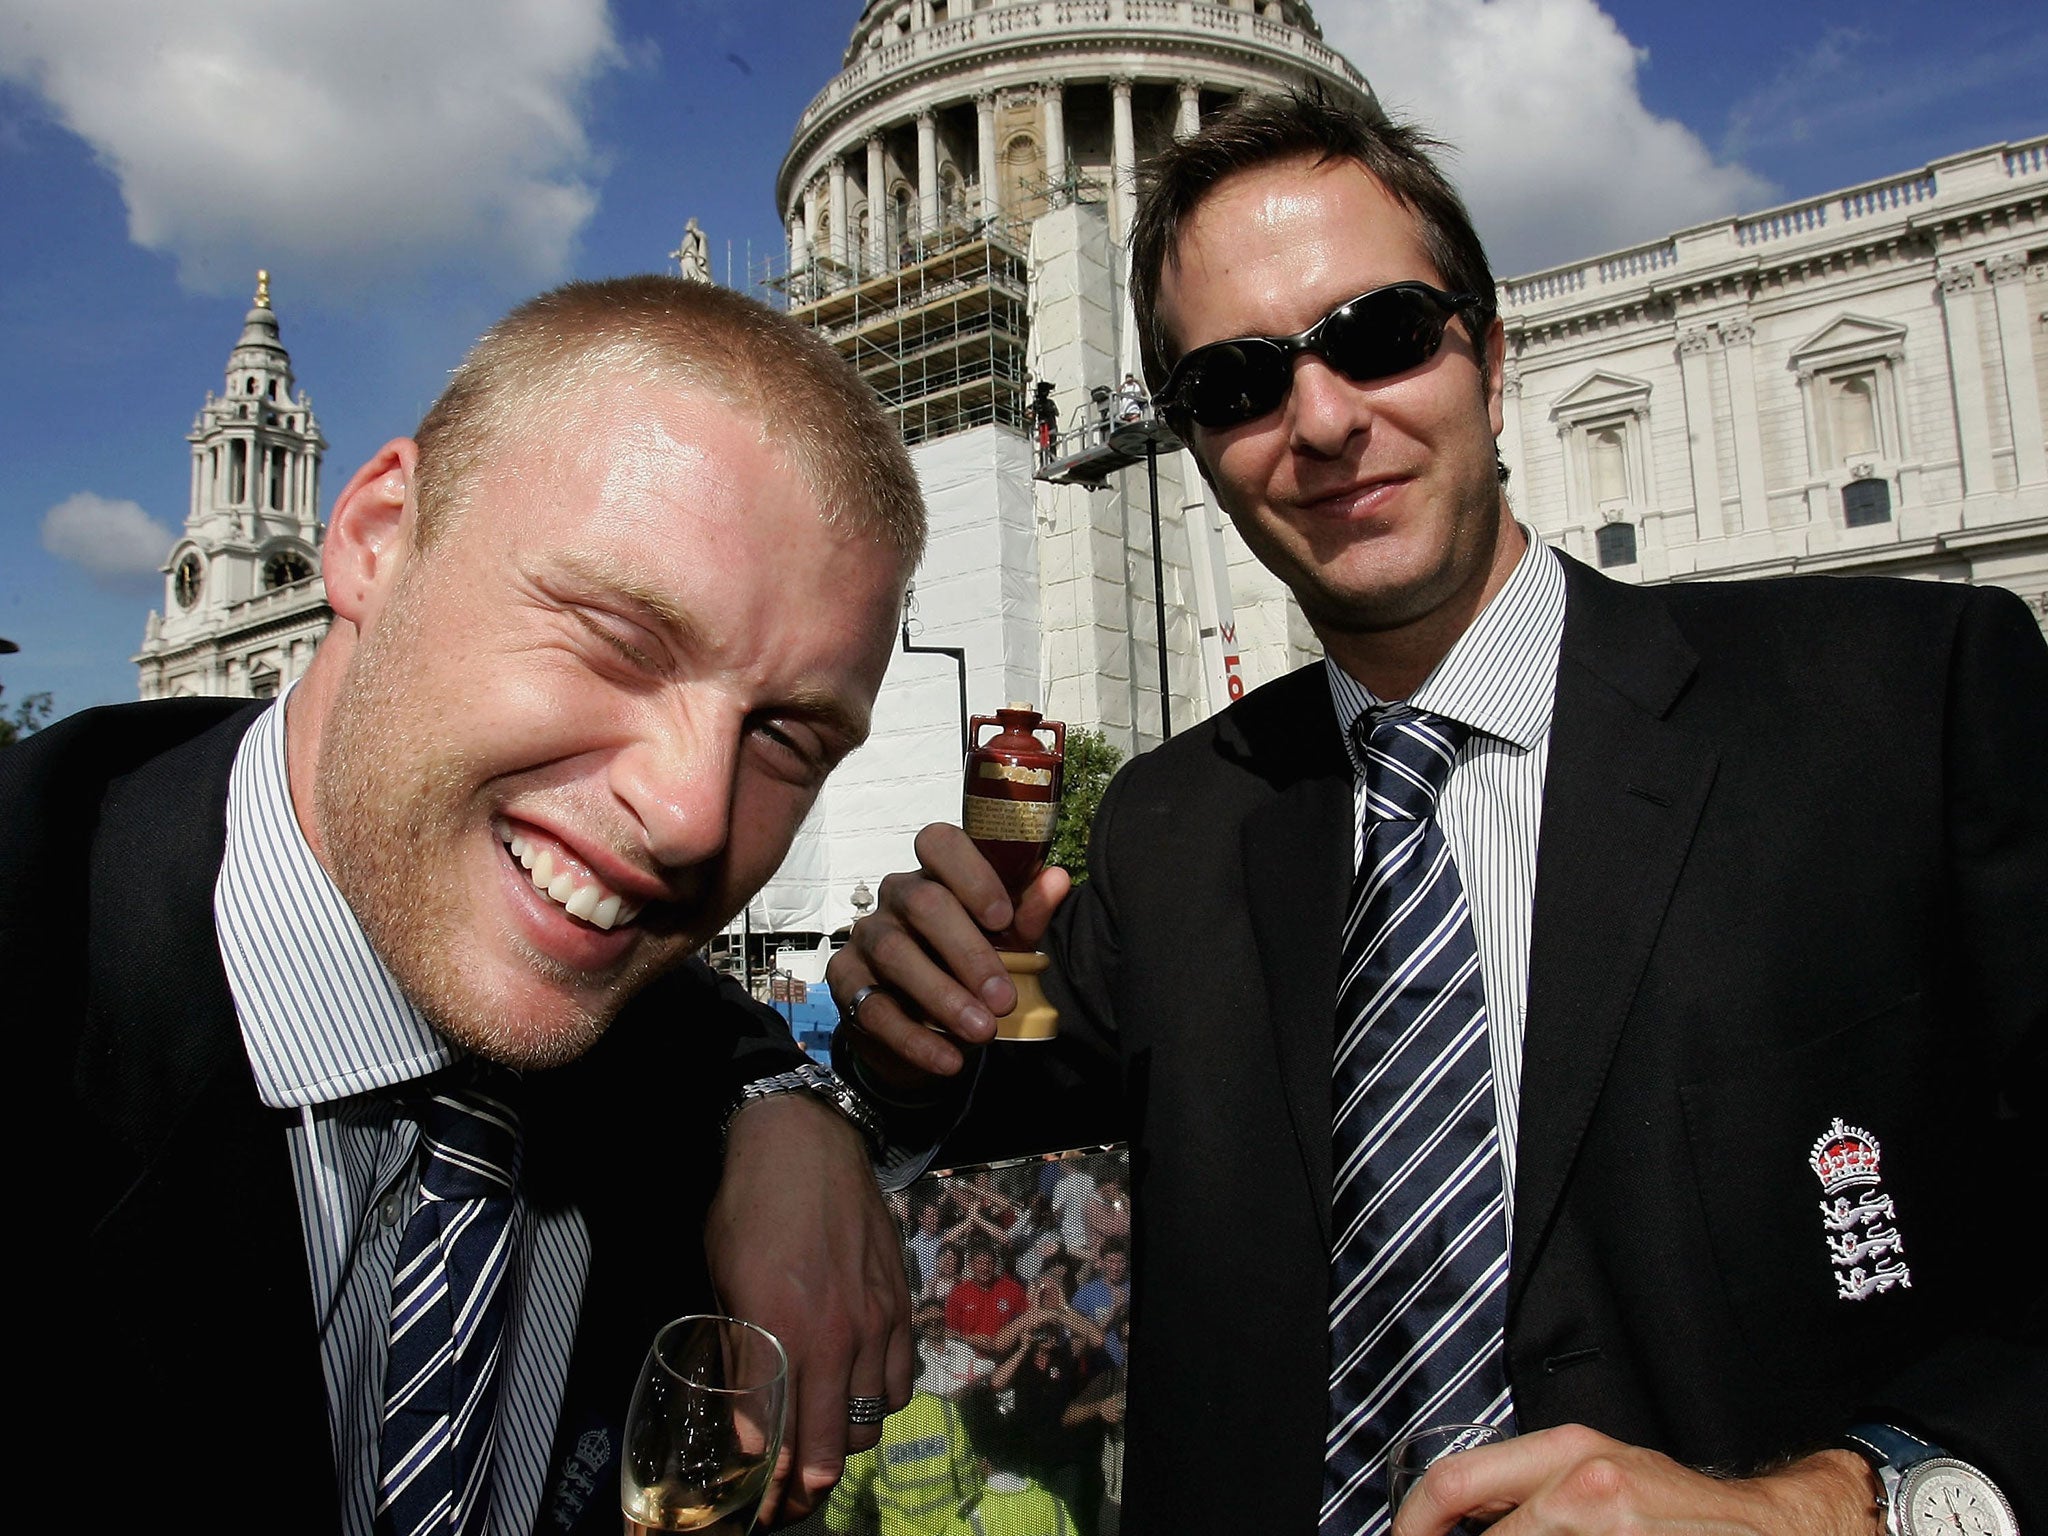 Andrew Flintoff (left) looks worse for wear celebrating Ashes glory with Michael Vaughan in
2005